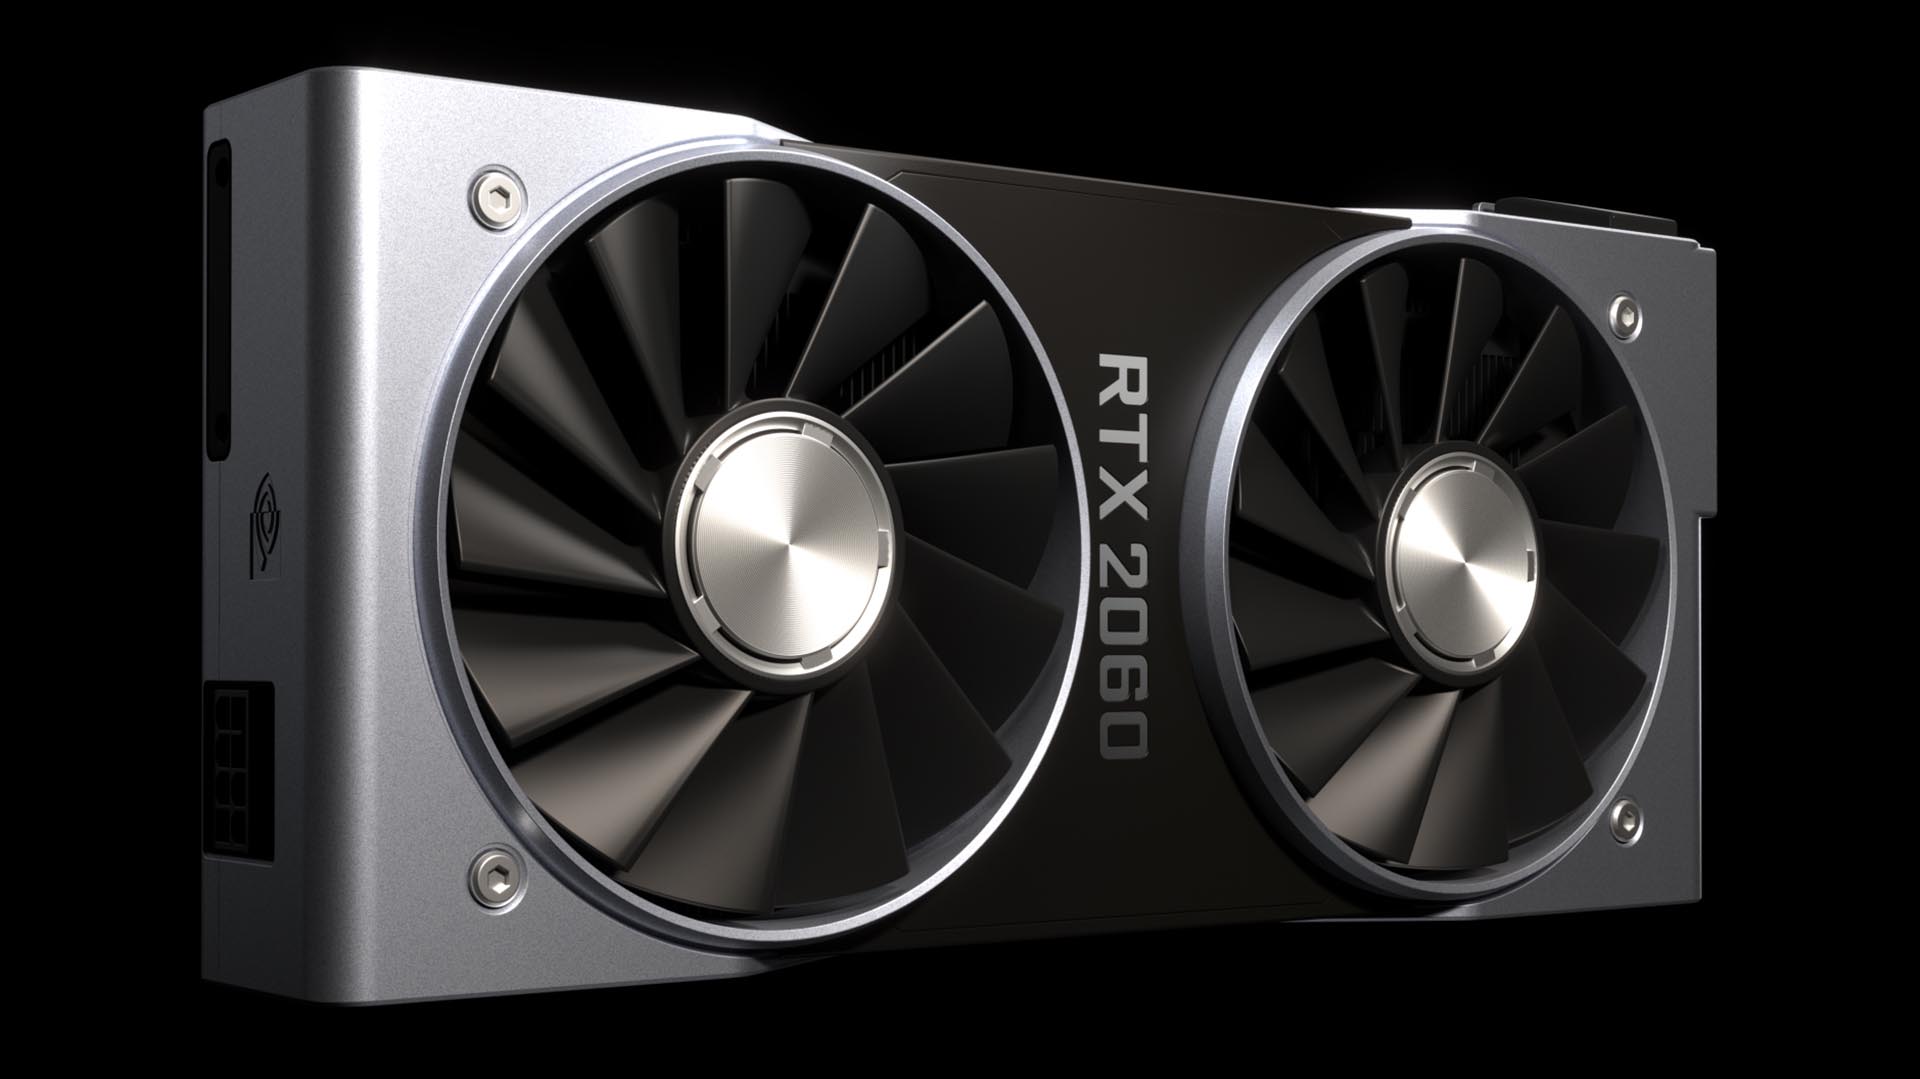 Nvidia cancels its RTX 2060 12GB Founders Edition GPU, days before launch